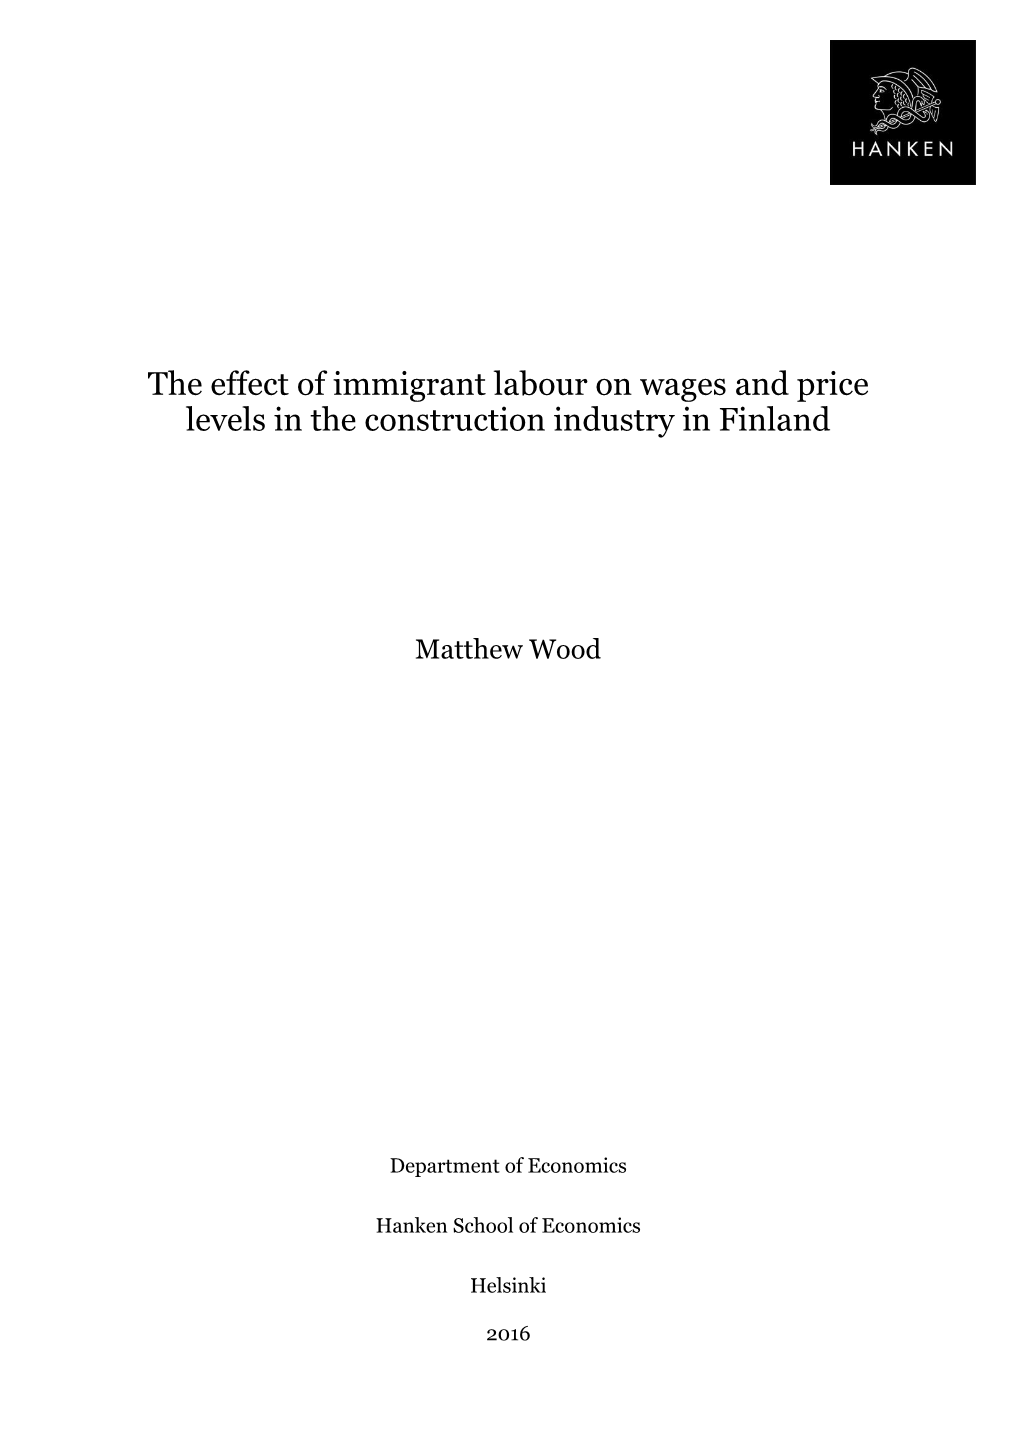 The Effect of Immigrant Labour on Wages and Price Levels in the Construction Industry in Finland